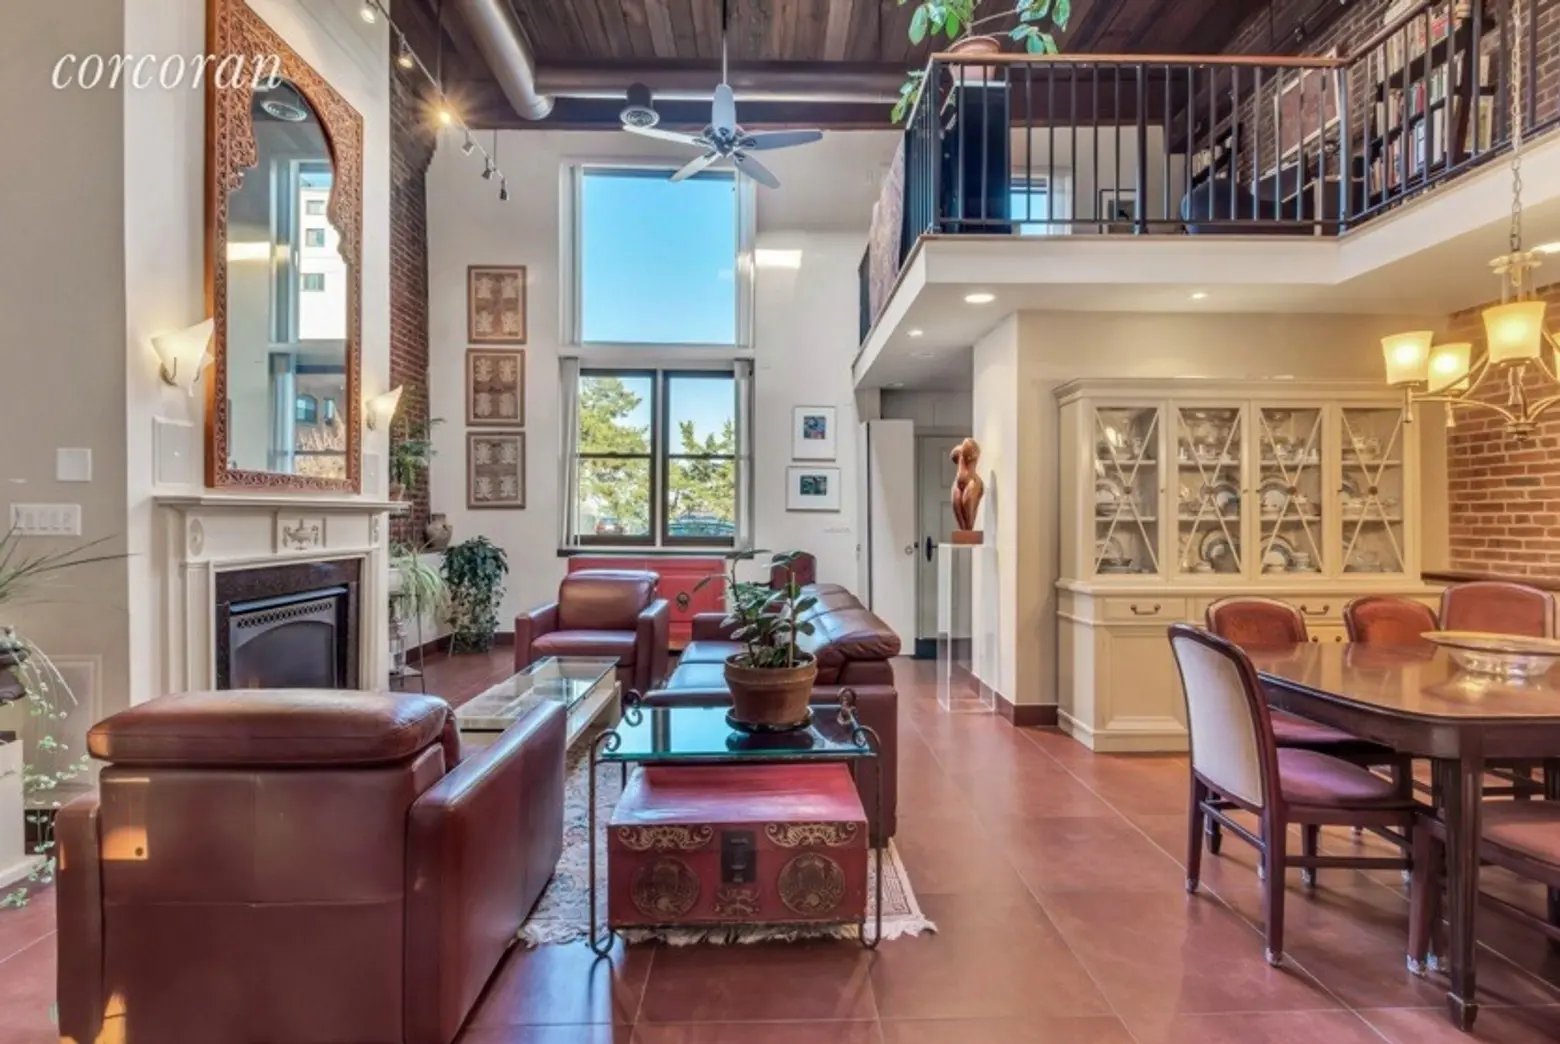 Impressive duplex townhouse asking $875K may lure you to Staten Island